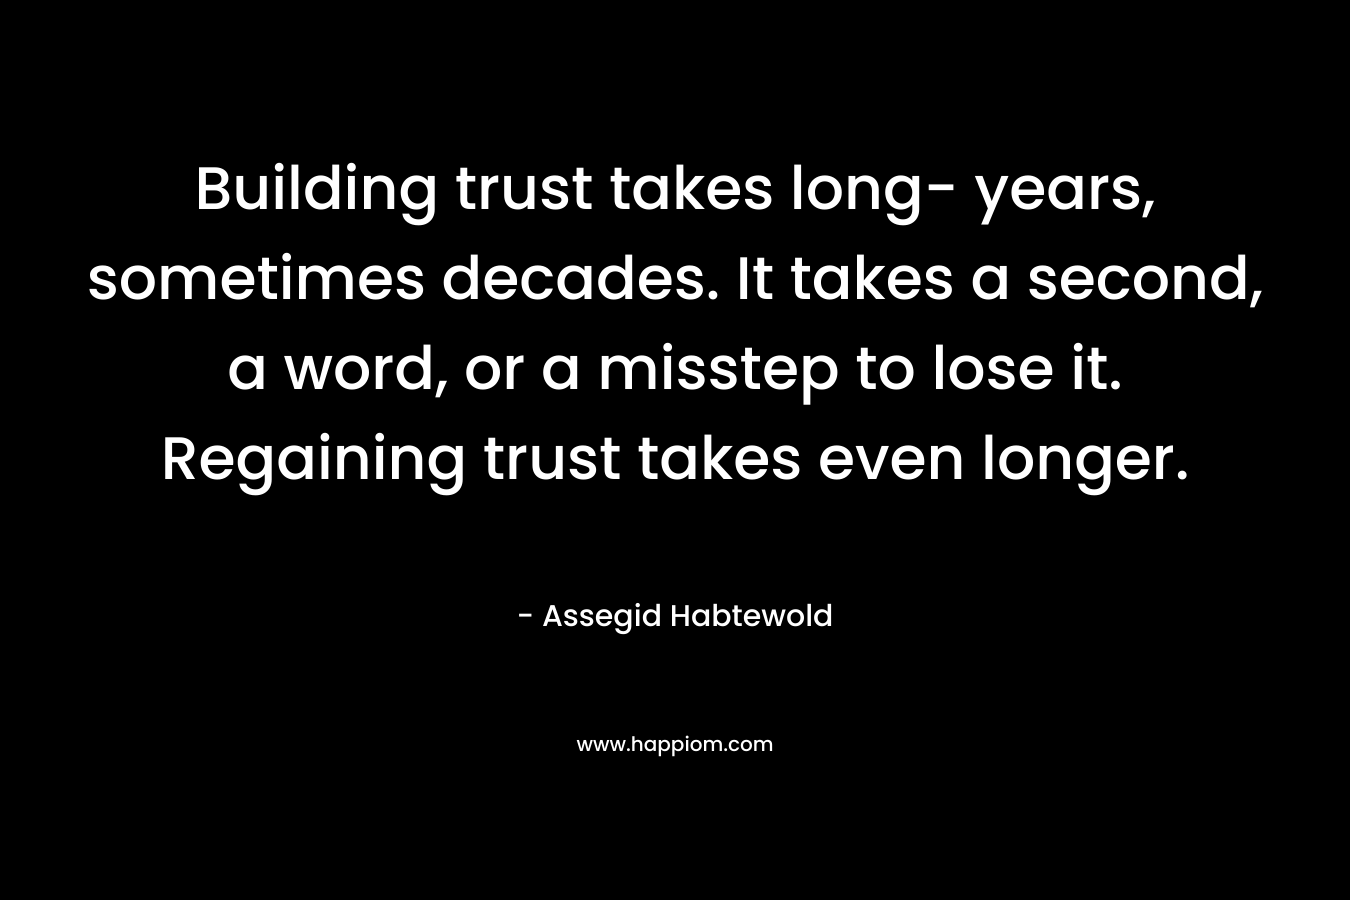 Building trust takes long- years, sometimes decades. It takes a second, a word, or a misstep to lose it. Regaining trust takes even longer.